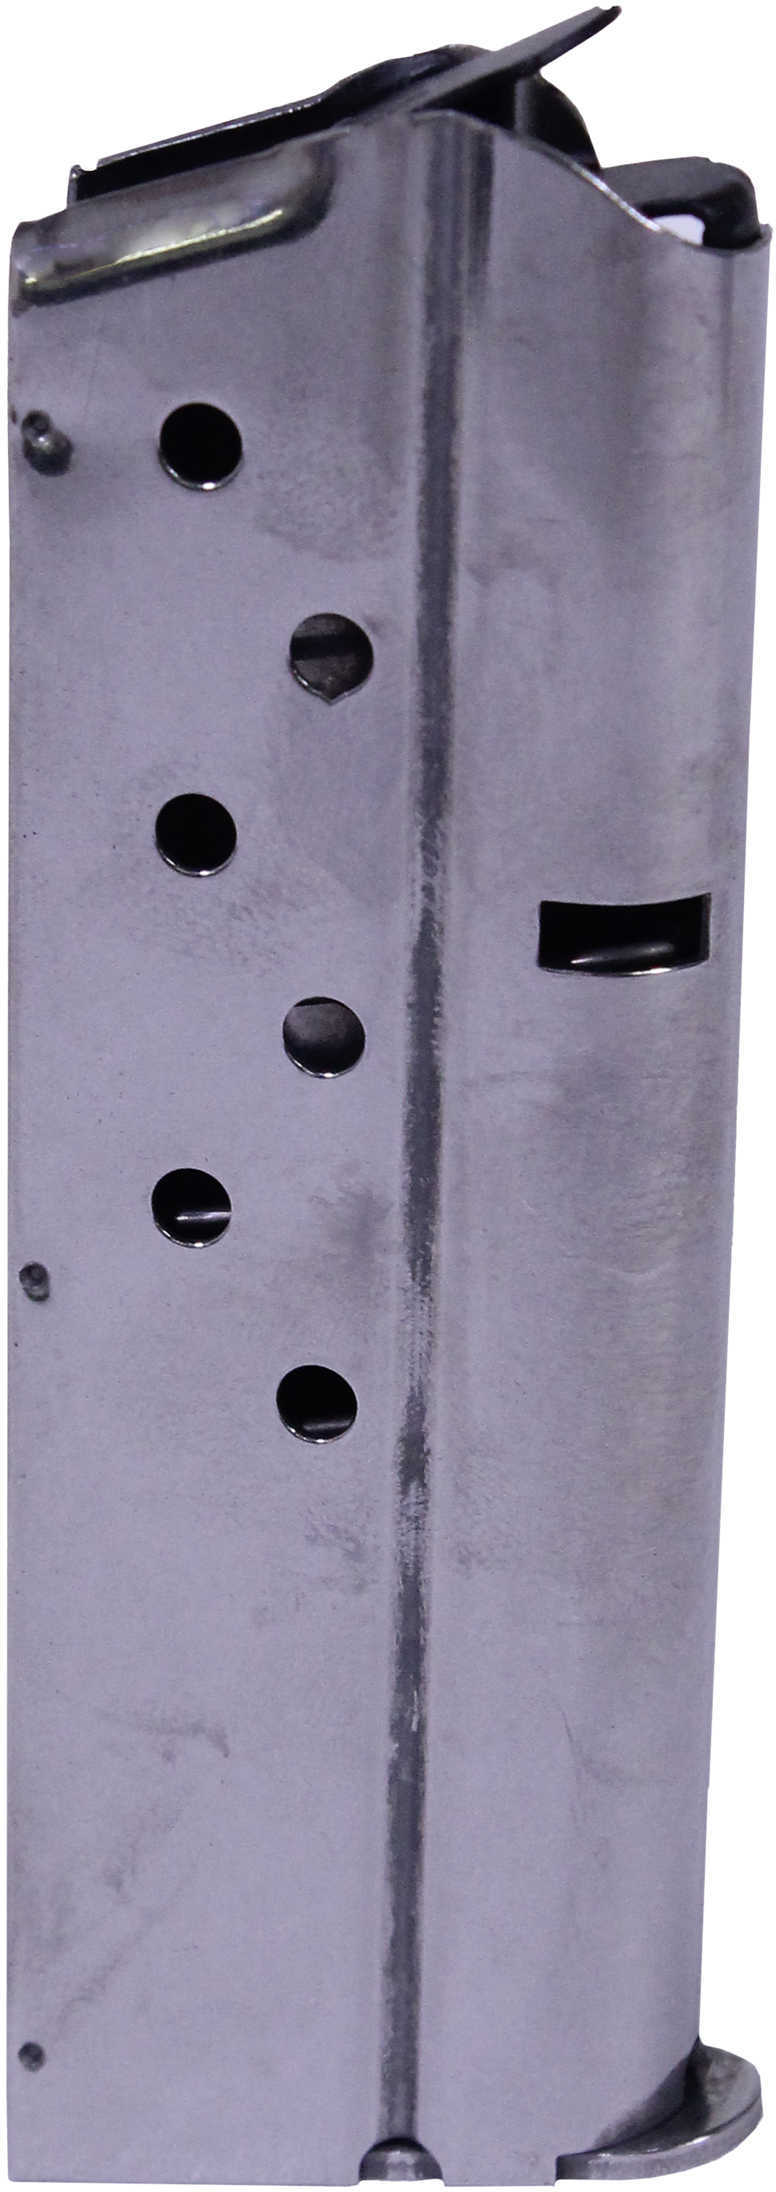 Sig Sauer MAG191198 1911 9mm Luger 8 Round Stainless Steel Finish